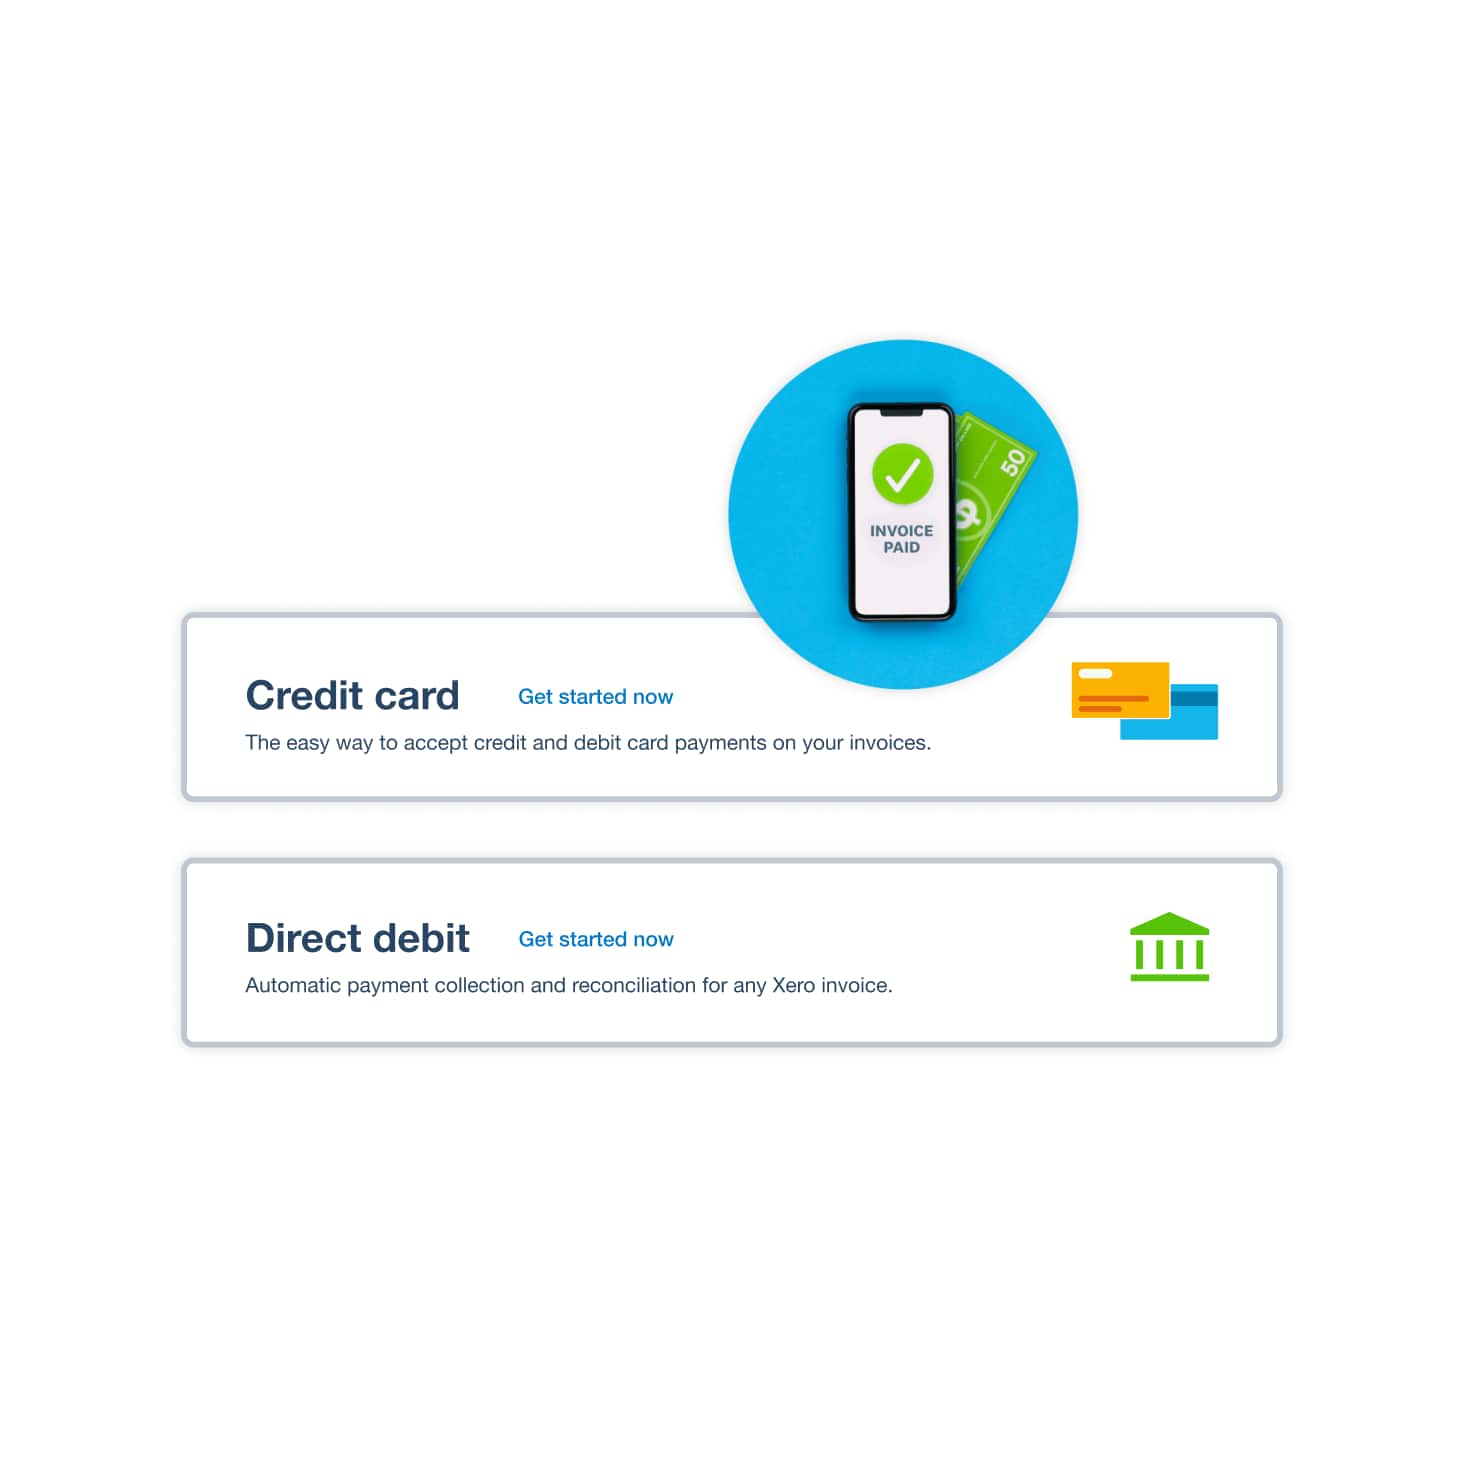 Credit or direct debit options for online invoice payments display in the accounting software for a startup business.